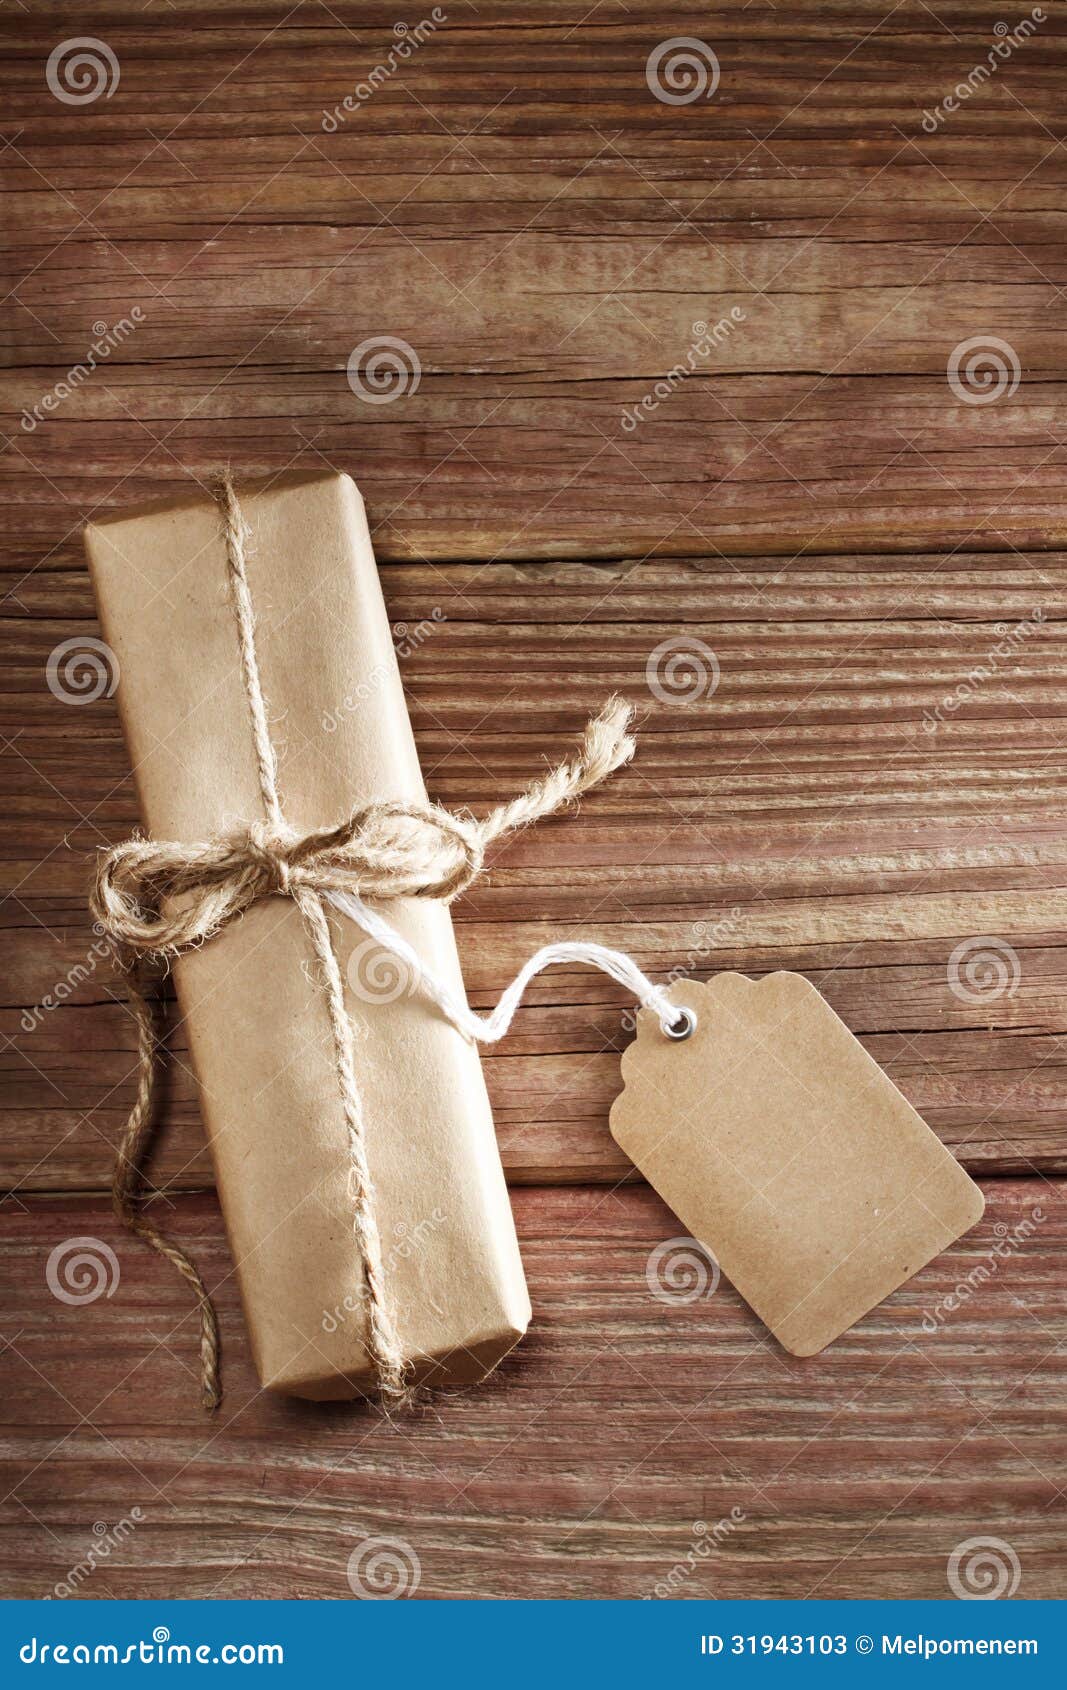 Gift Box On Rustic Wooden Table Stock Image - Image: 31943103